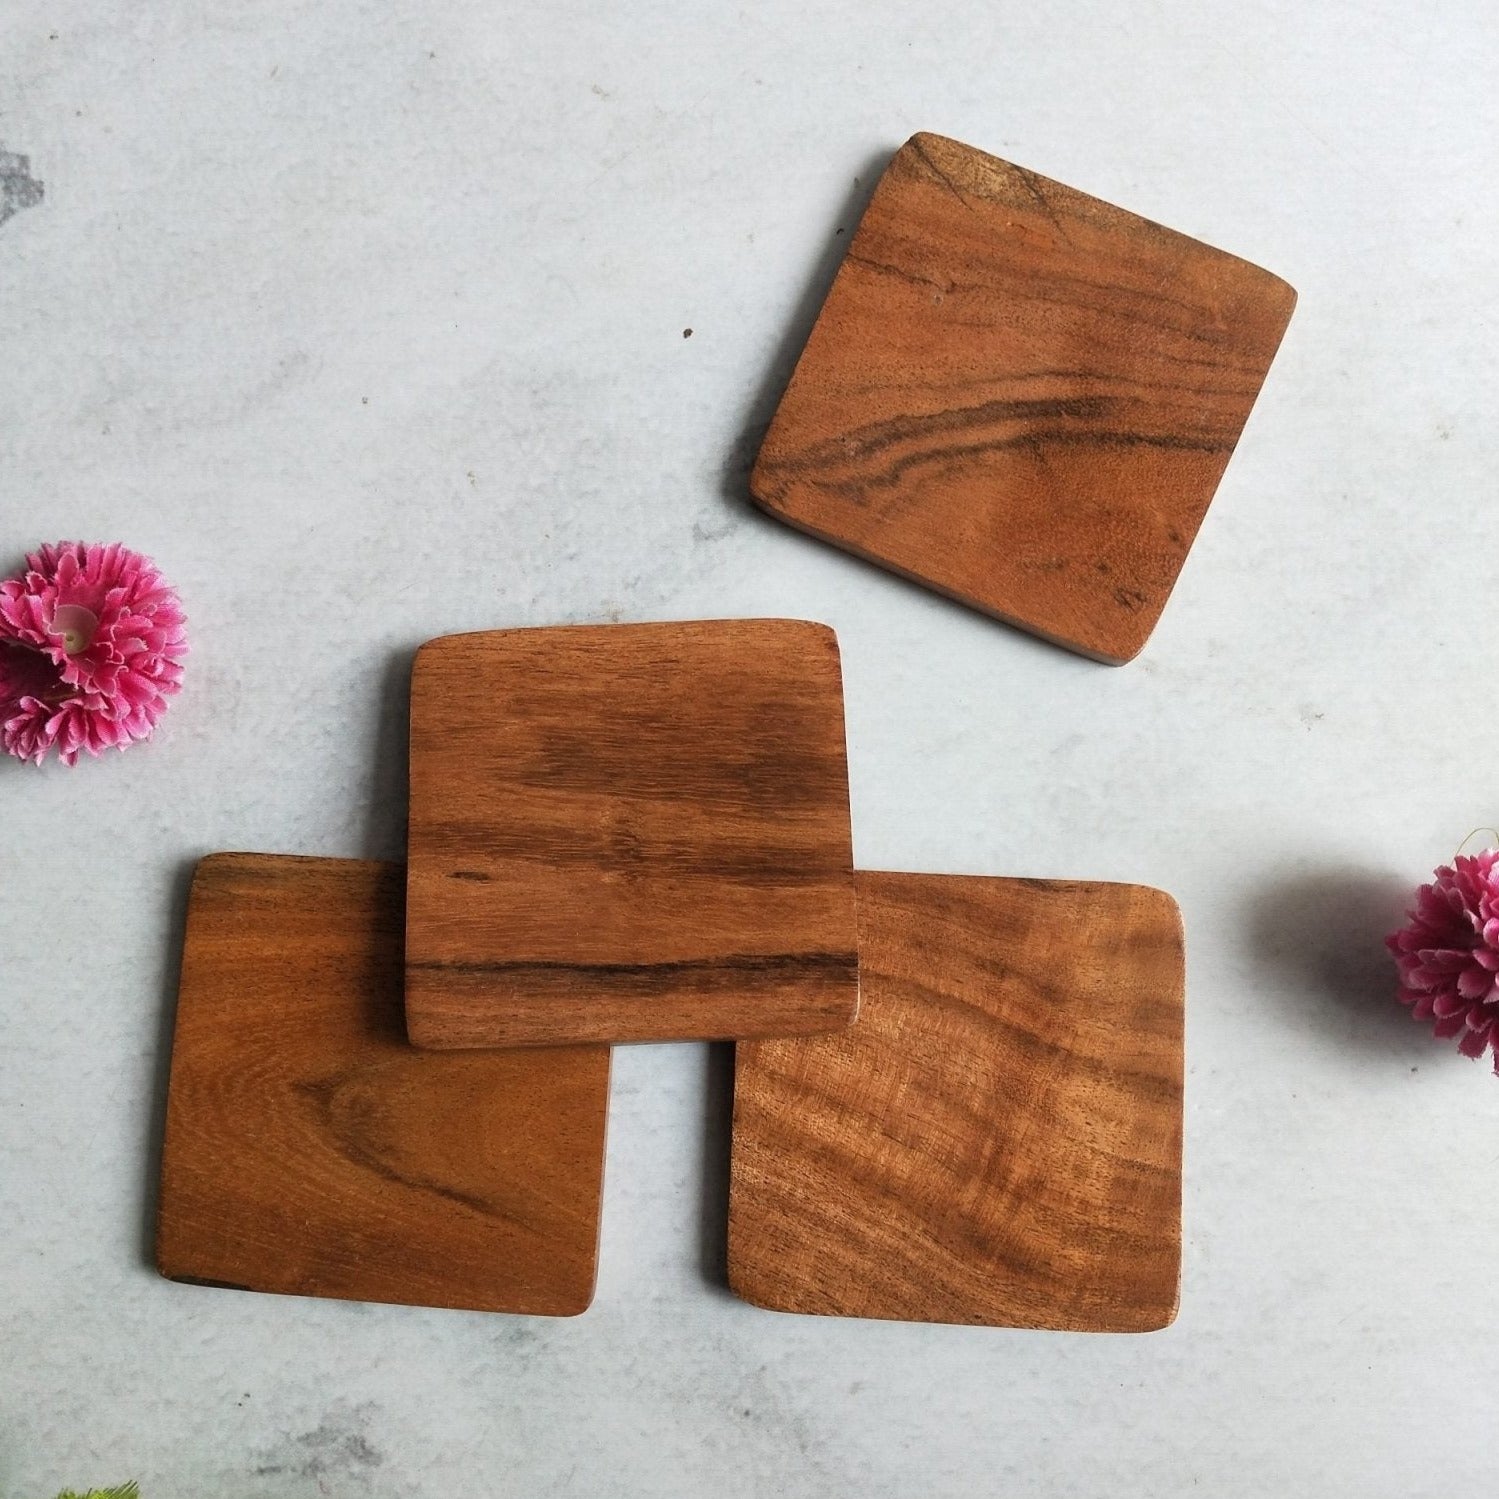 Wooden Squared Shaped Coasters Set of 4 - Nurture India